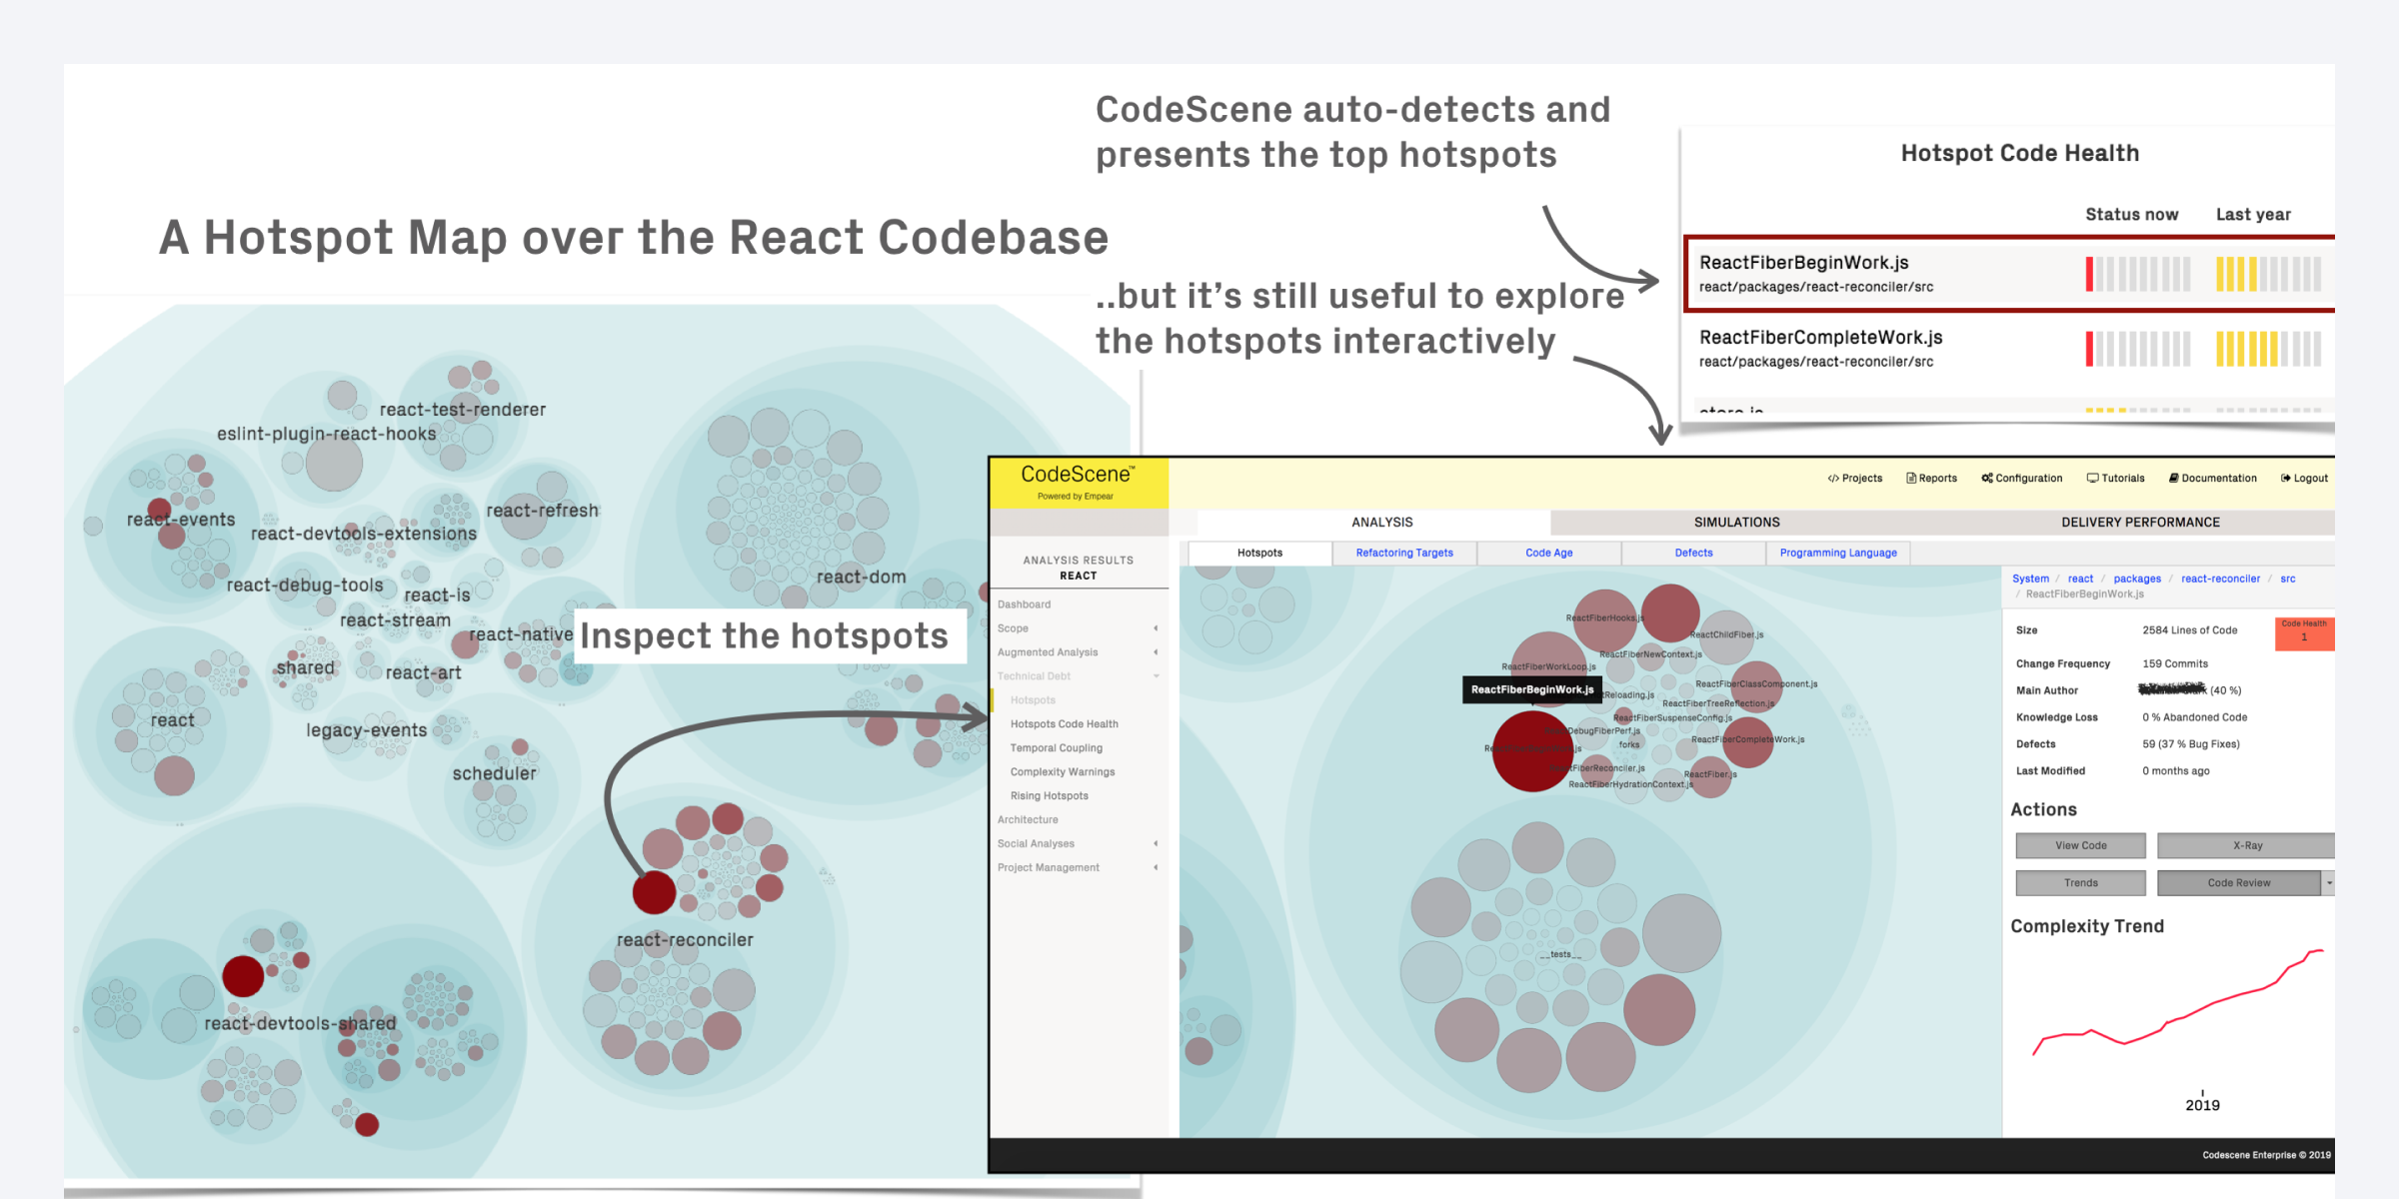 Graphs that show how CodeScene prioritizes hotspots with high development activity and a declining code health.